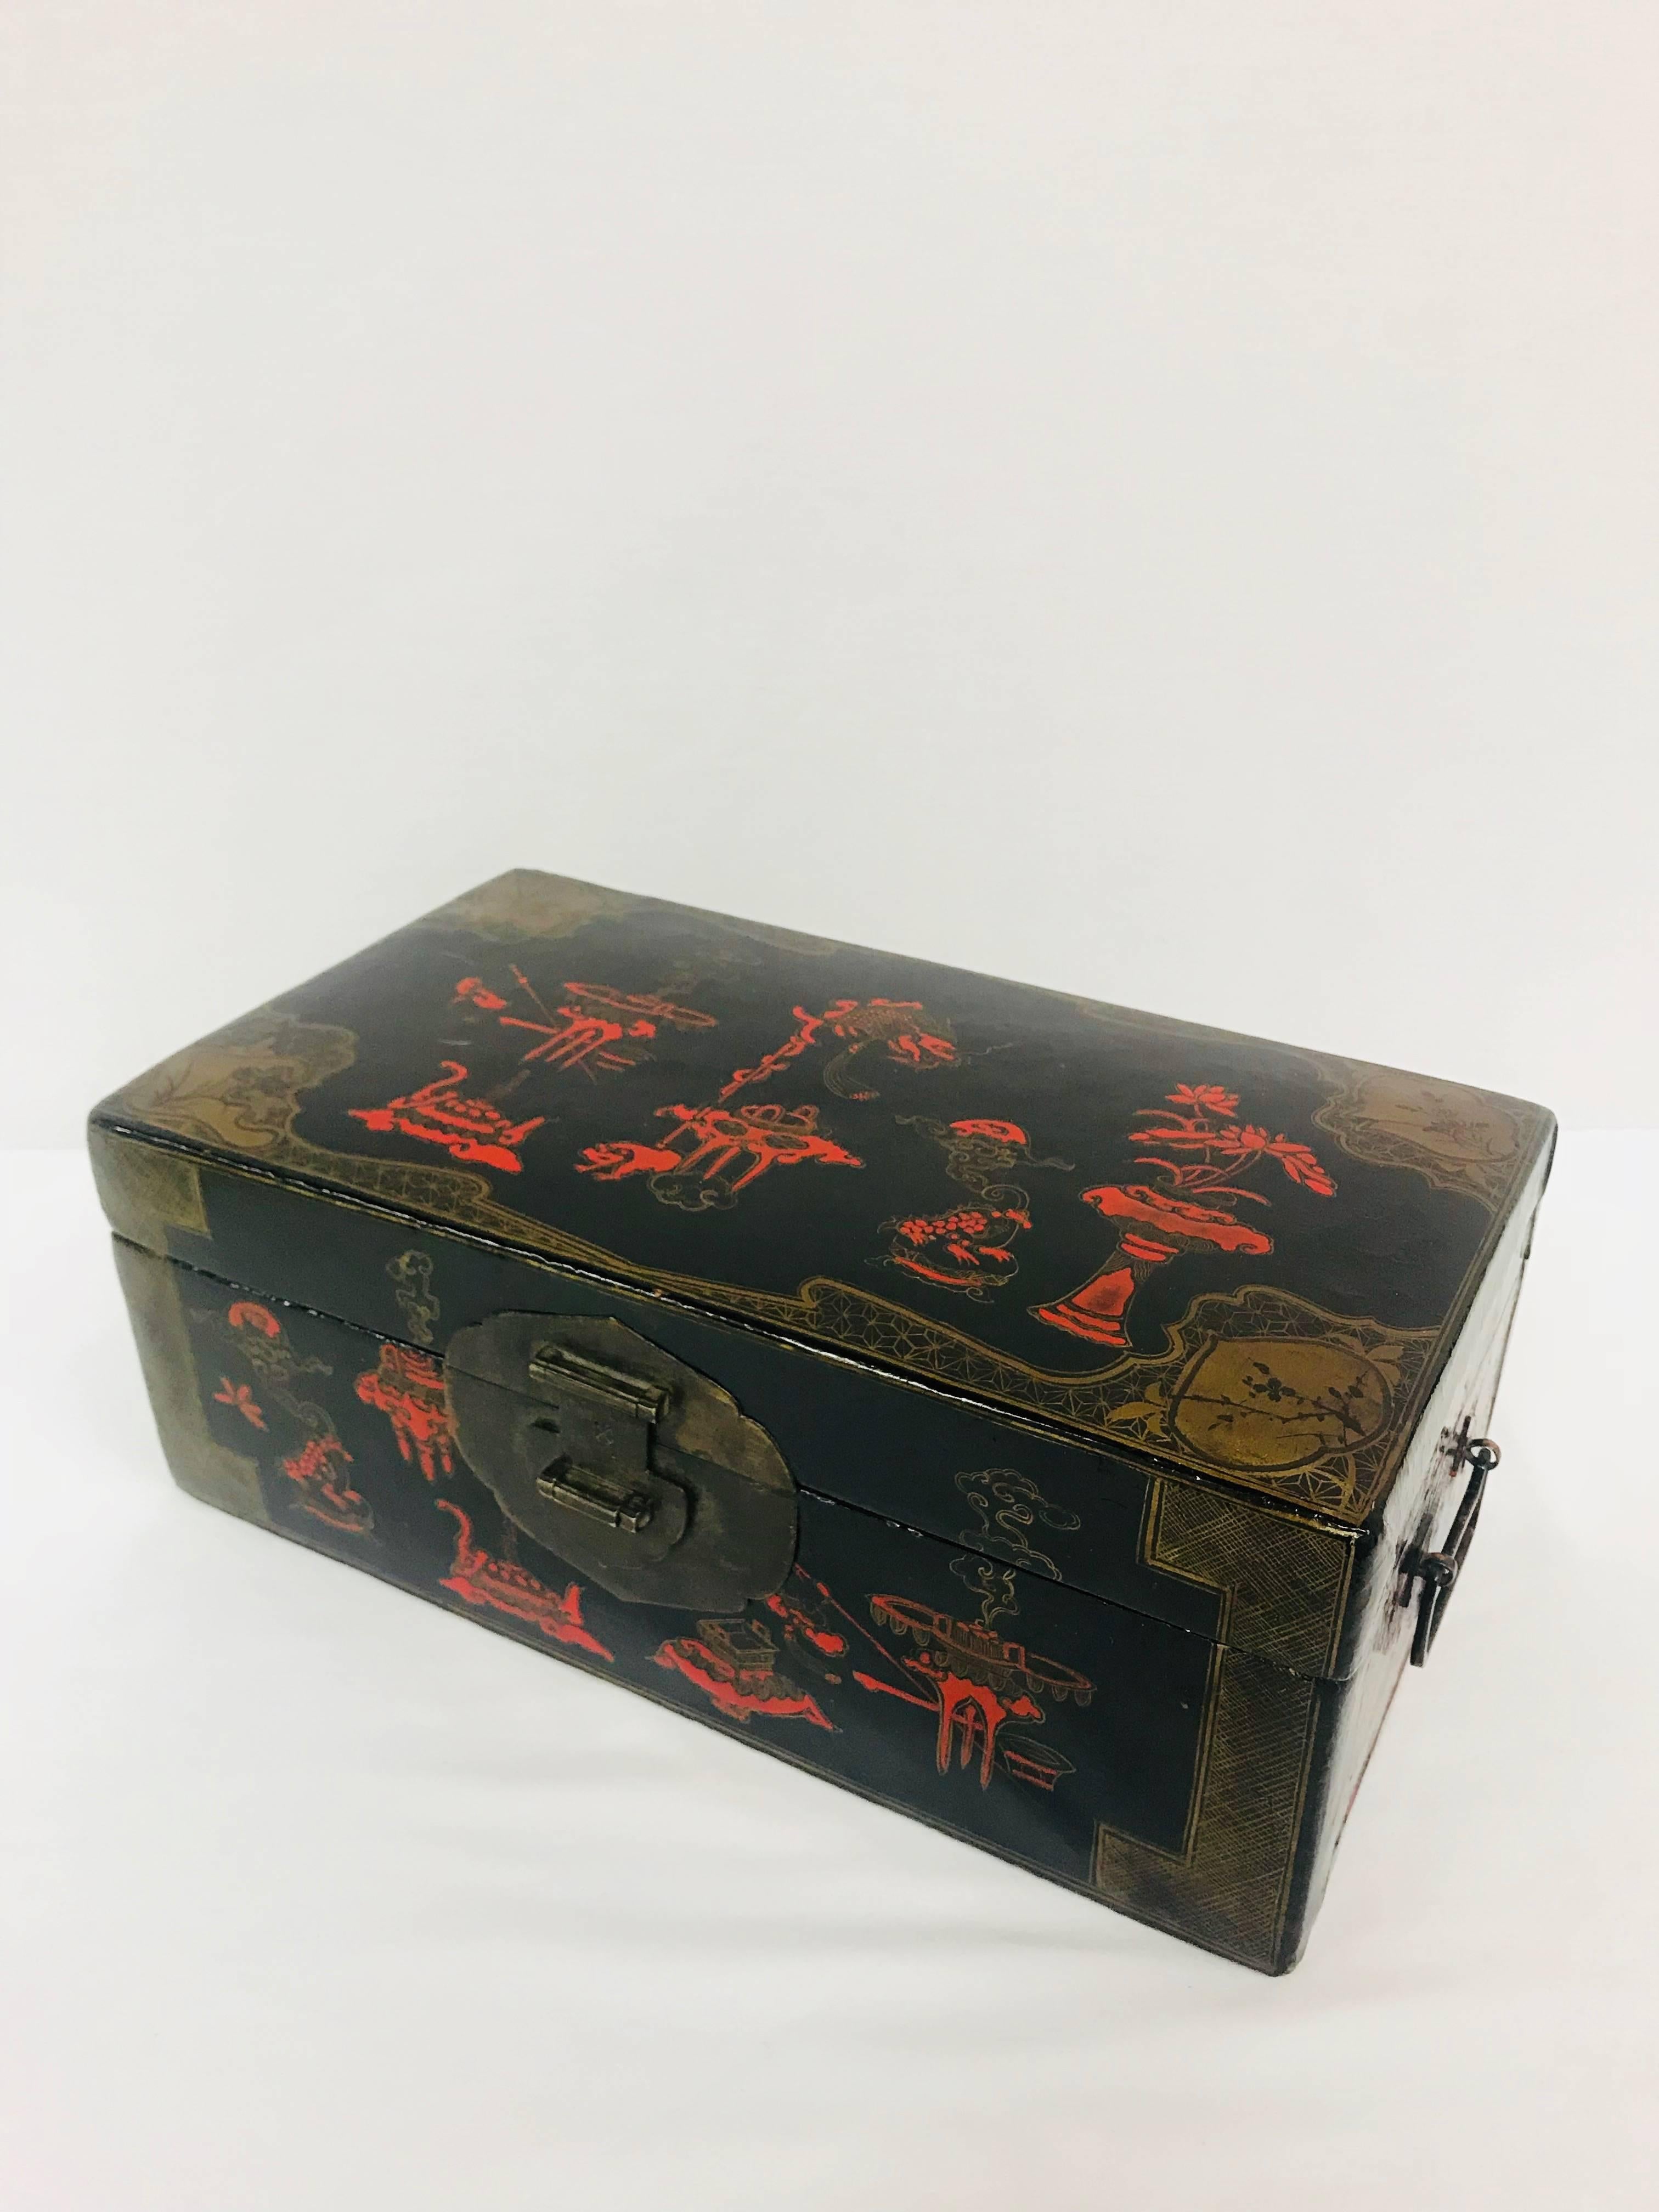 A late 19th century Chinese lacquered box decorated with scarlet-red and gilt Chinoiserie motifs. Stunning brass hardware will keep your treasures tidy.
Box interior dimensions: 13.25” L x 6.75” W x 4” H.